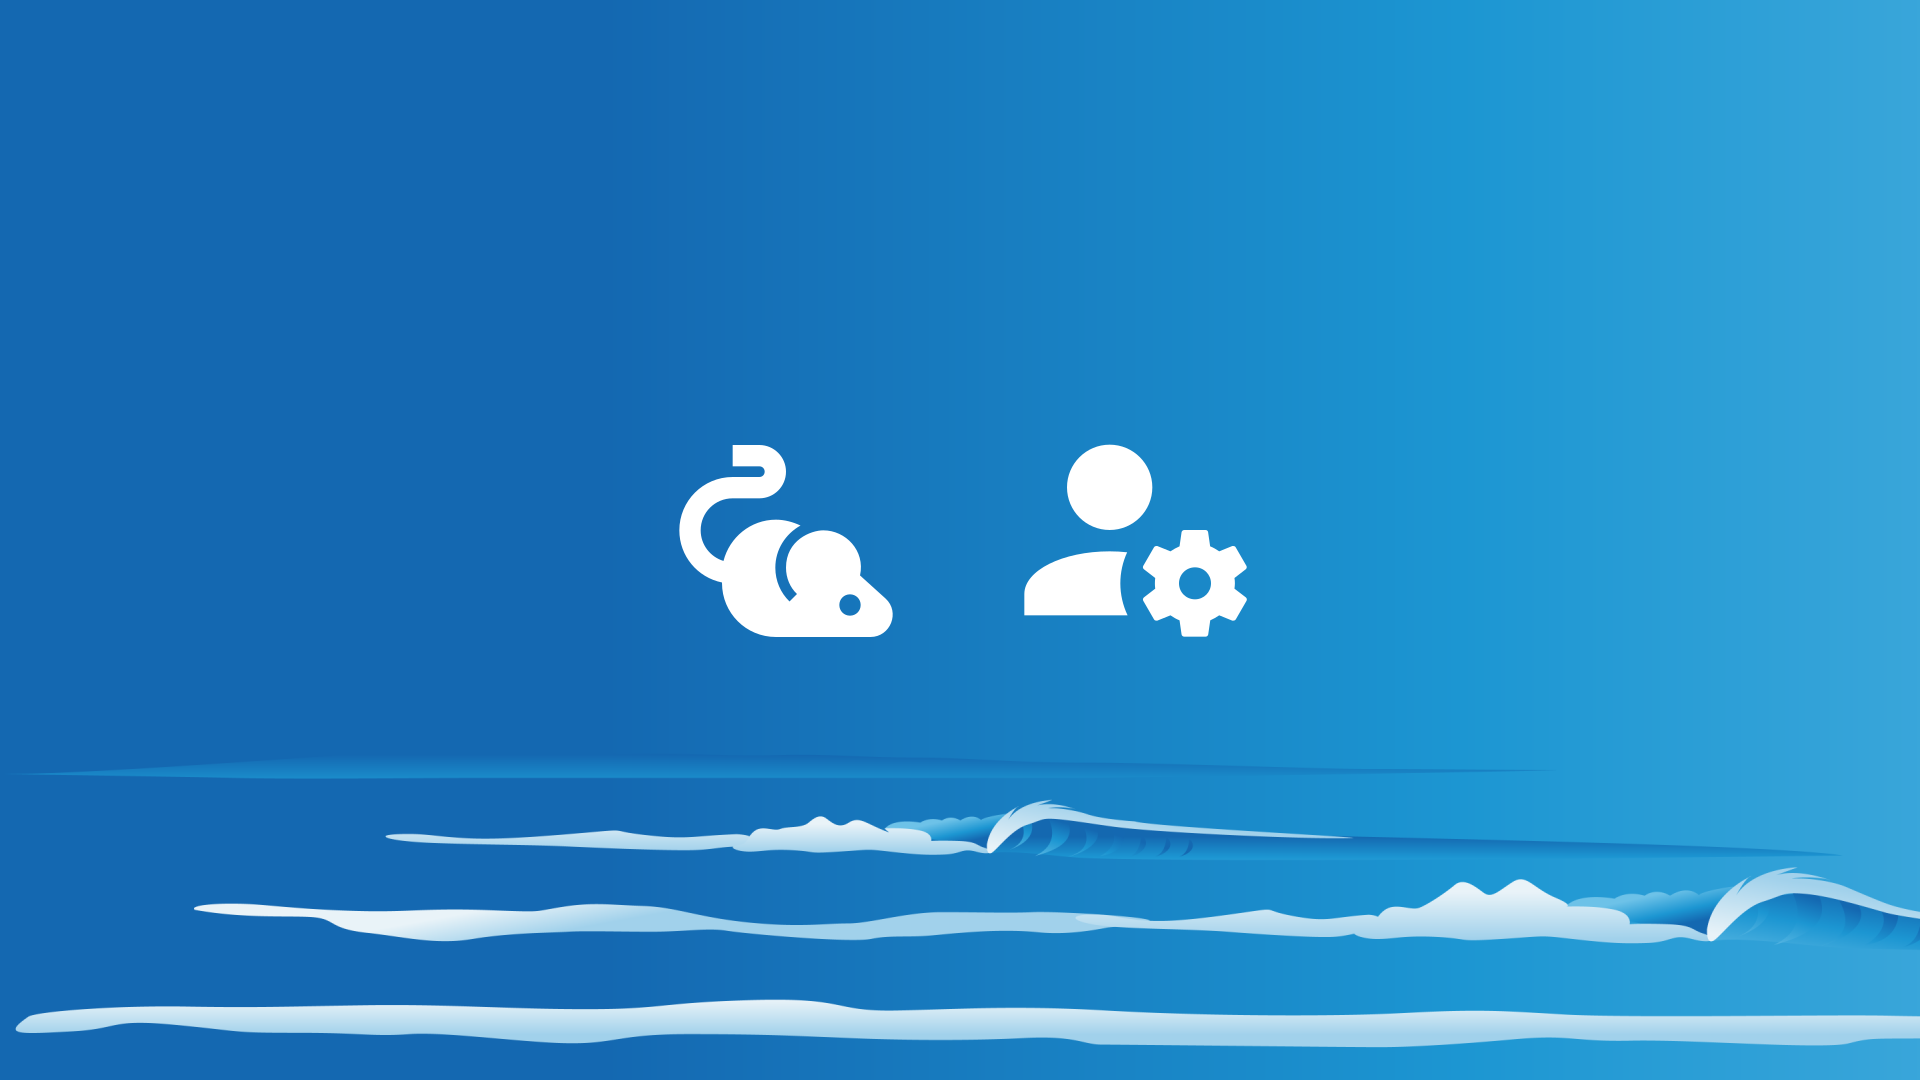 Sea background with rodent icon and account settings icon